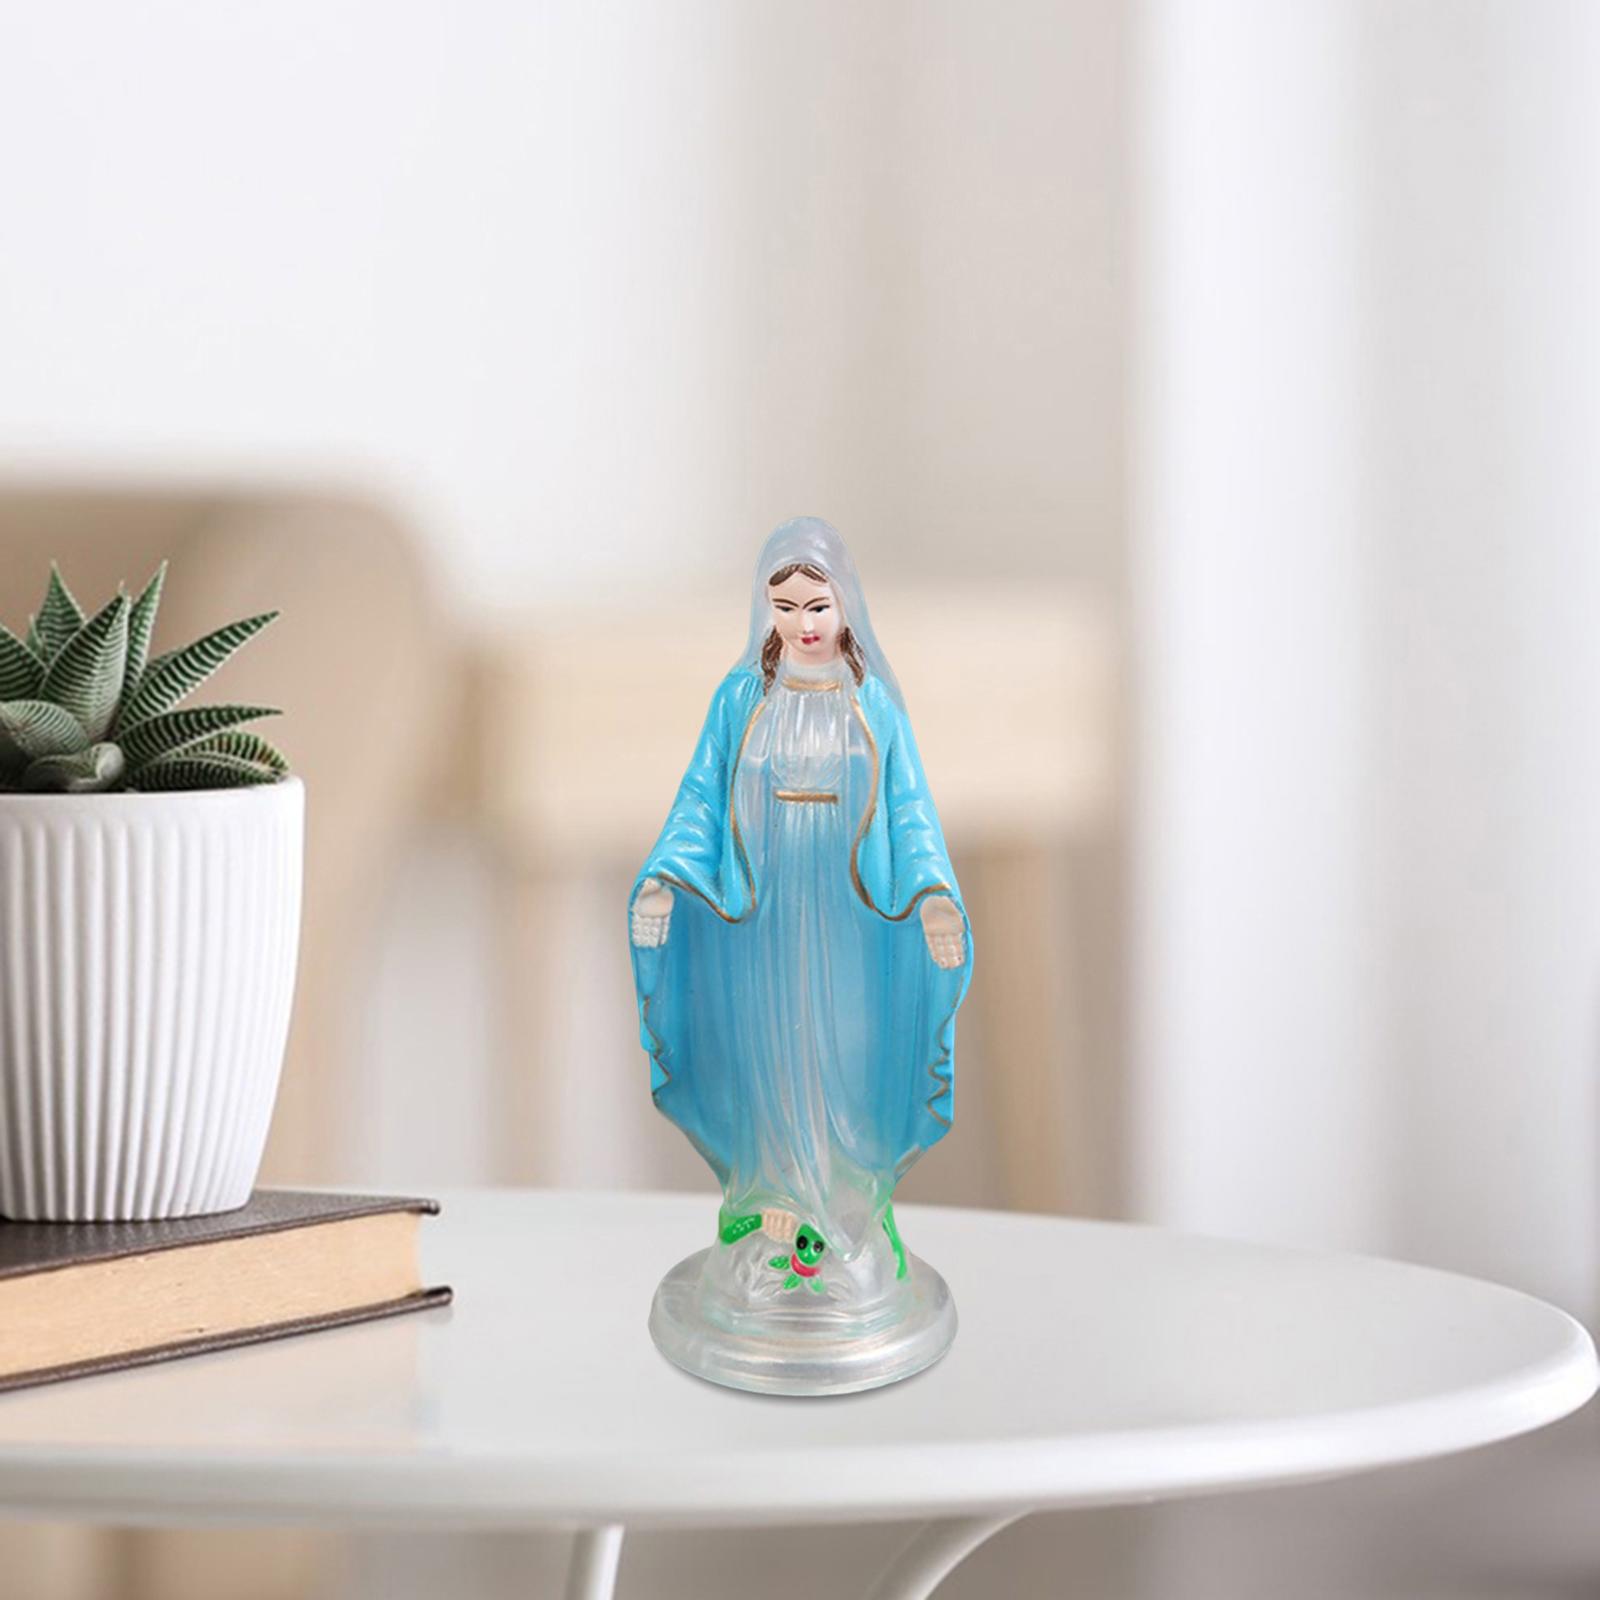 Blessed Virgin Mary Figurine Character Sculpture Statue Decoration 10cm Clear Blue Coat